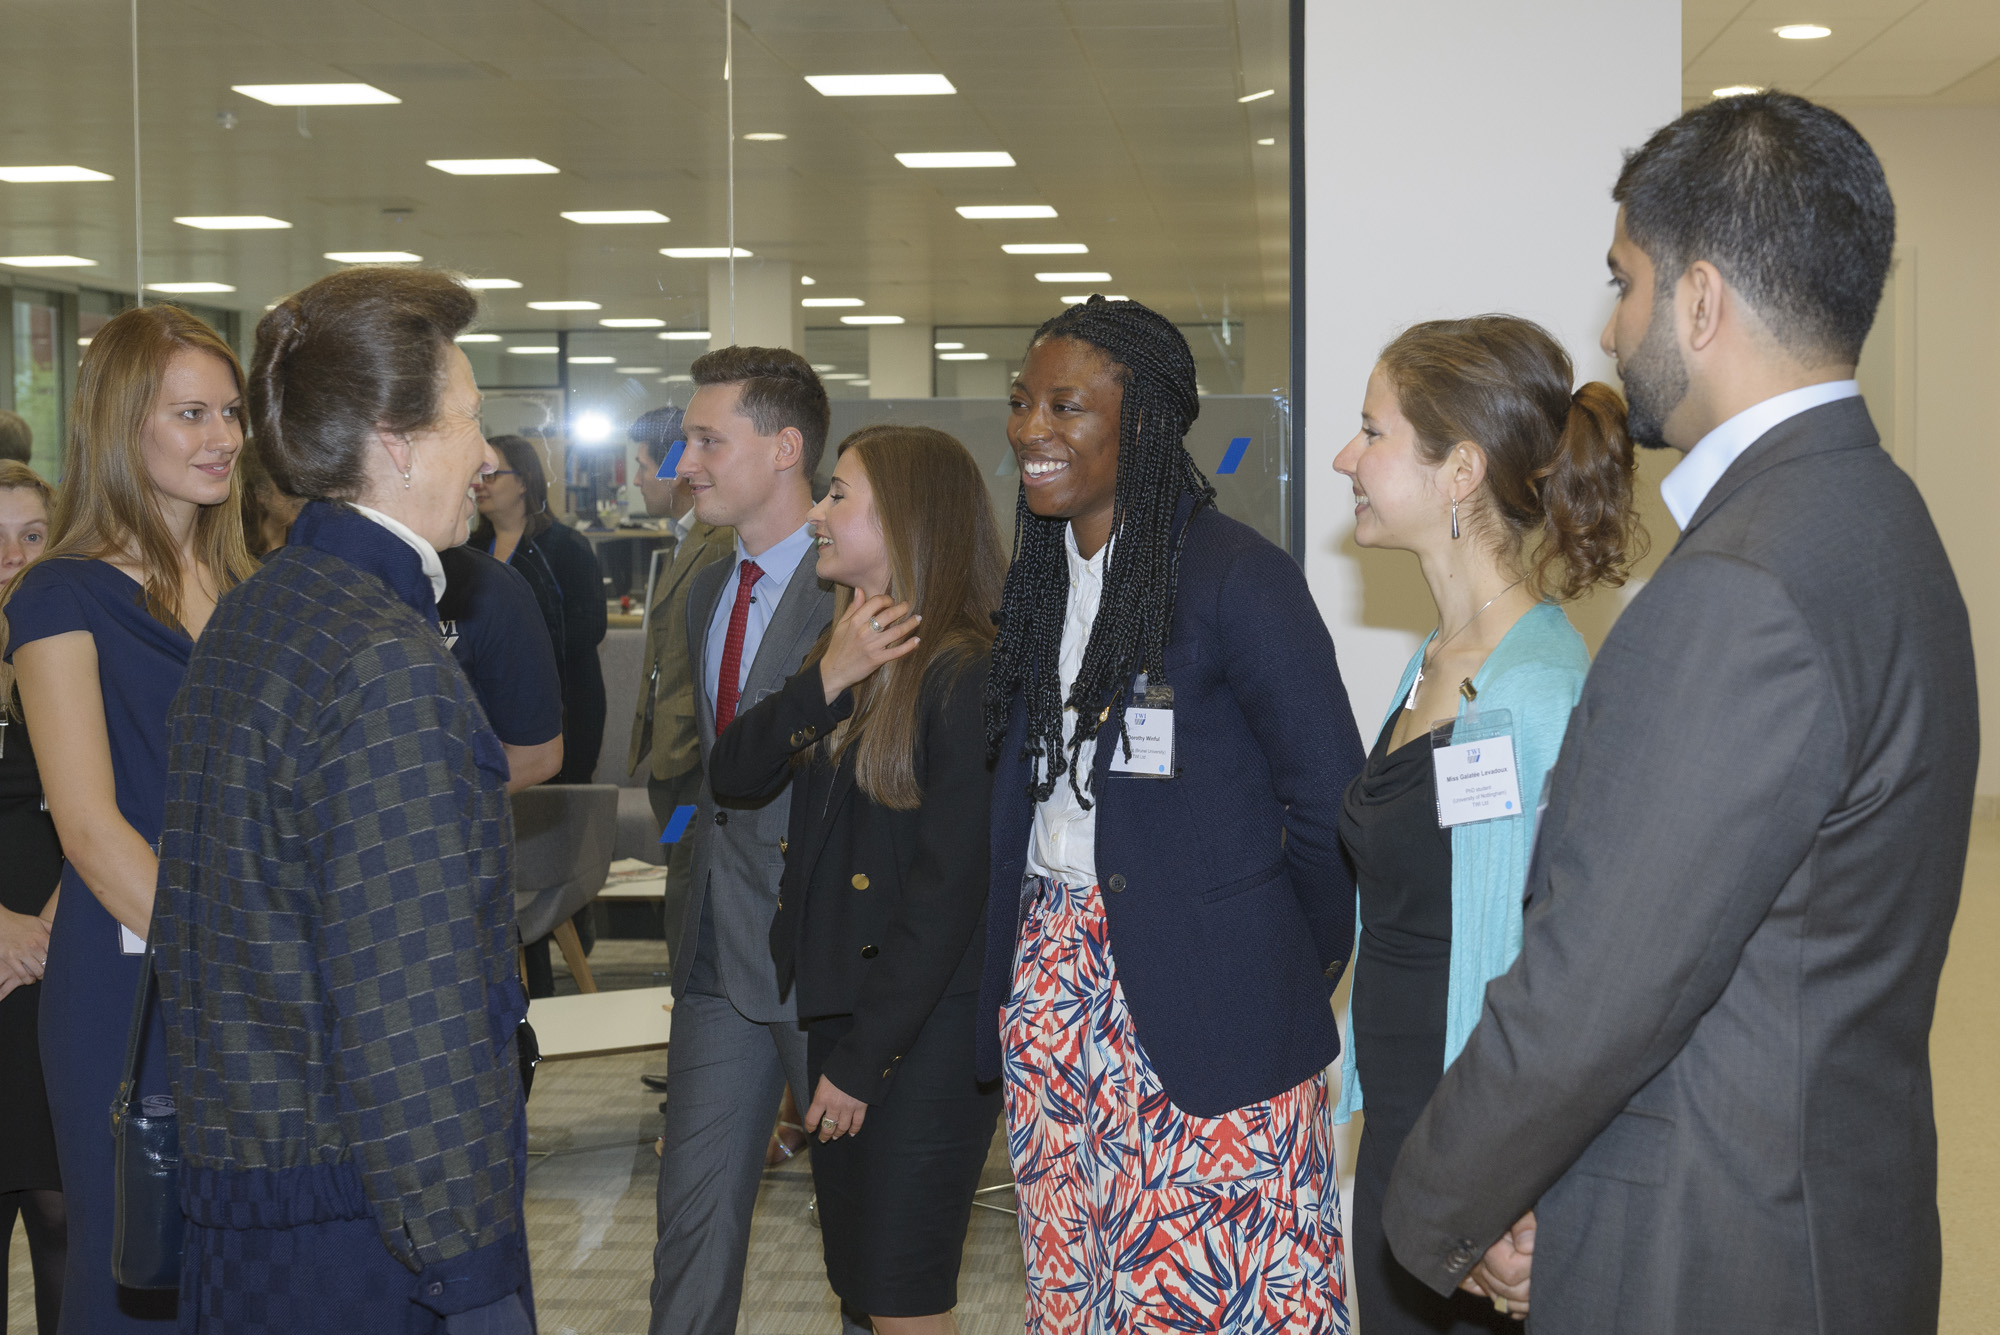 Her Royal Highness meets young engineers and apprentices at TWI